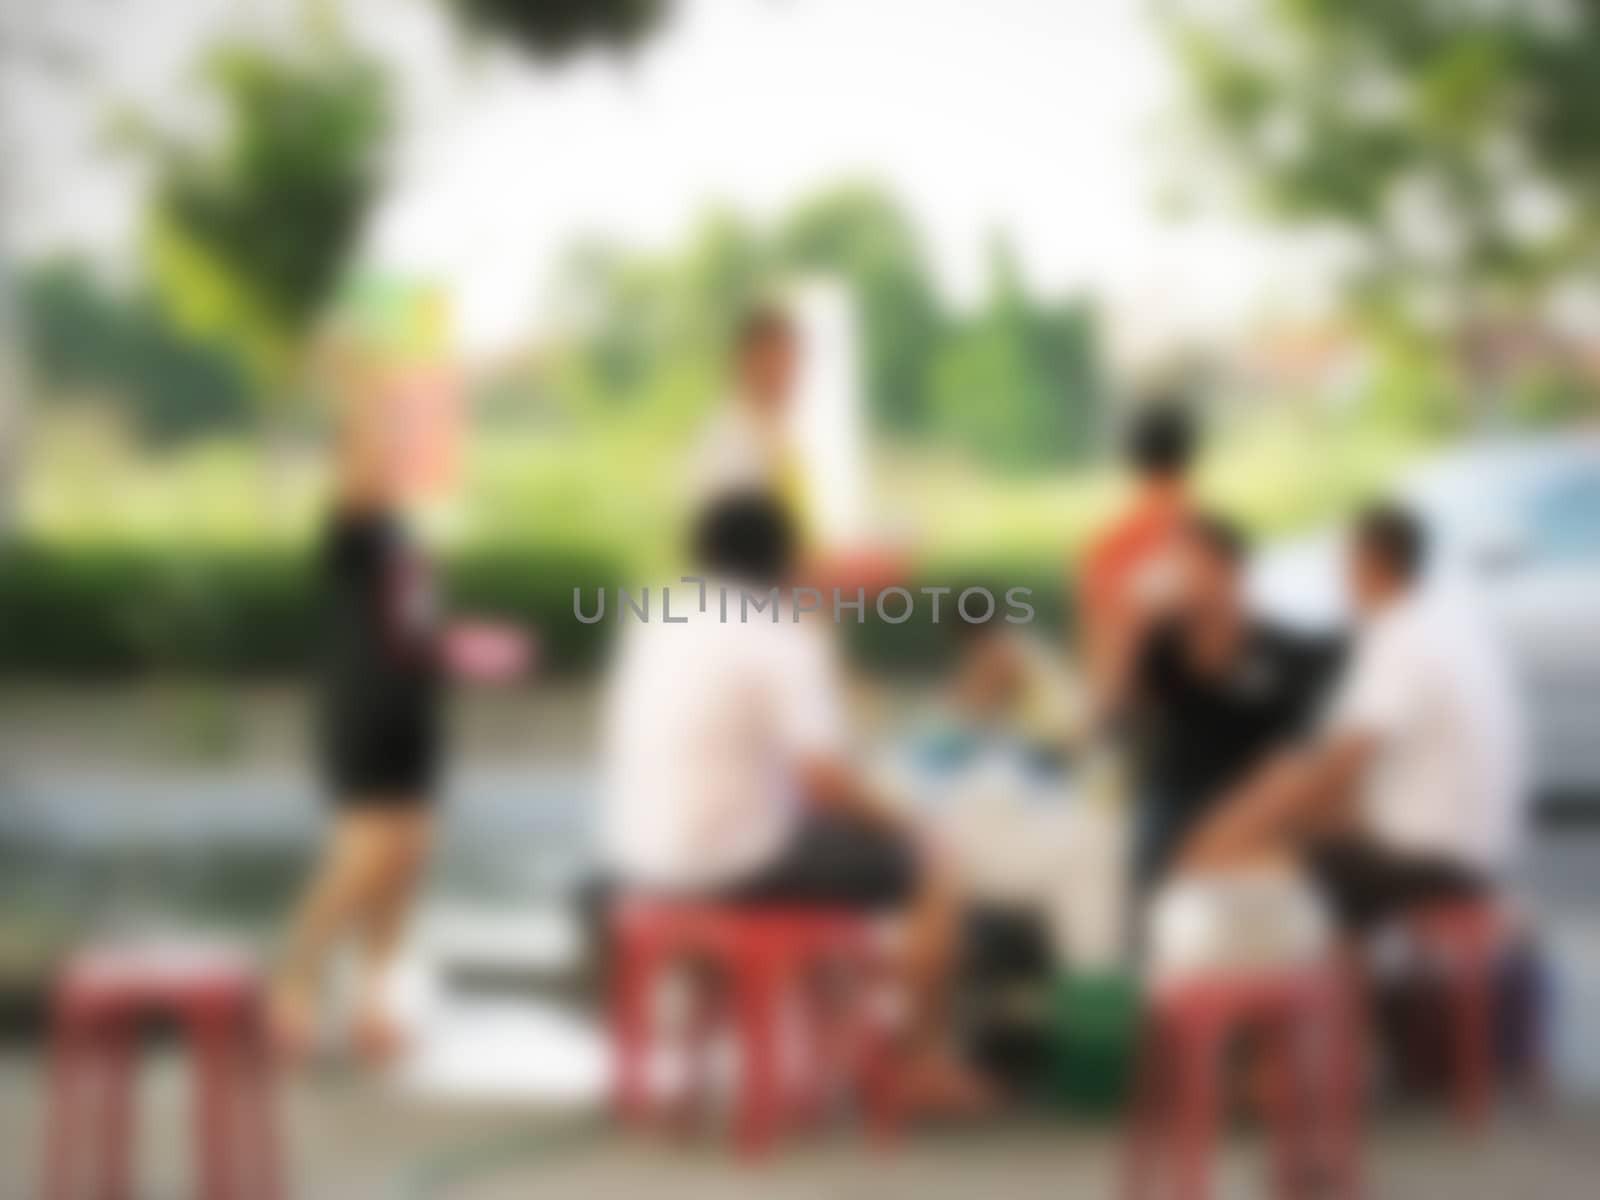 defocused of people sitting on red chair waiting for something by a3701027